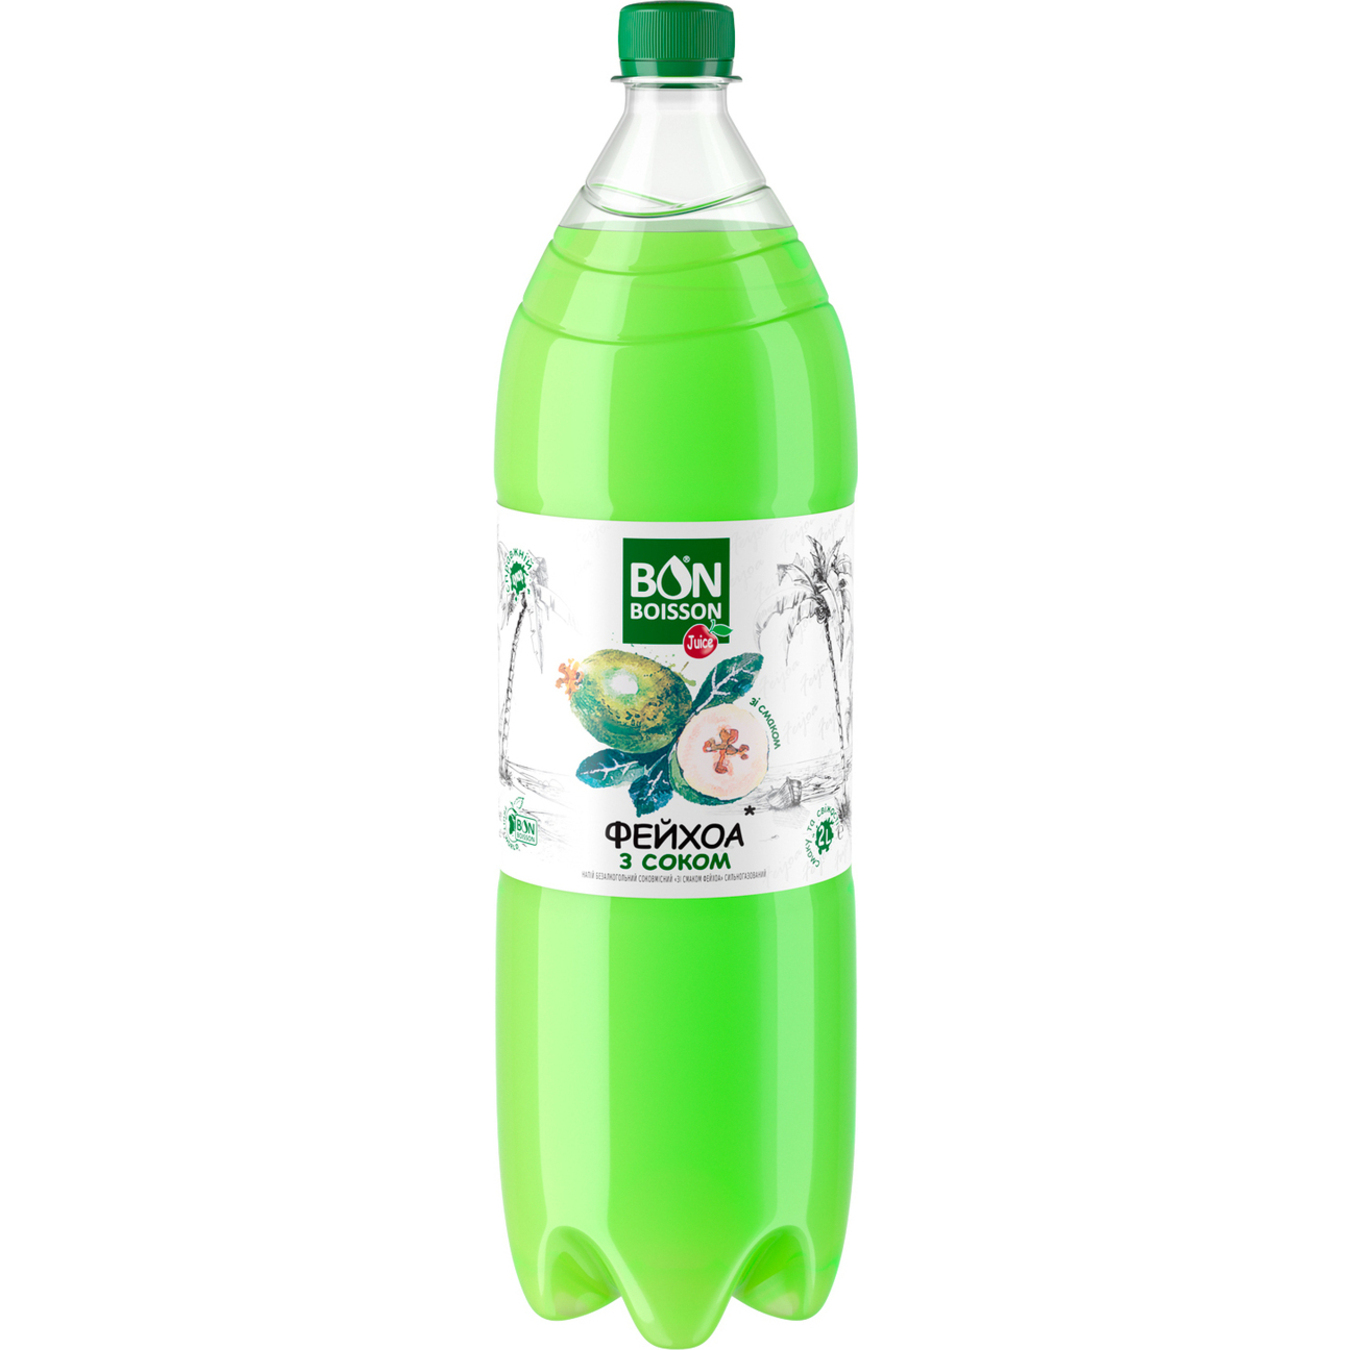 Bon Boisson Feijoa Highly Carbonated Drink 2l